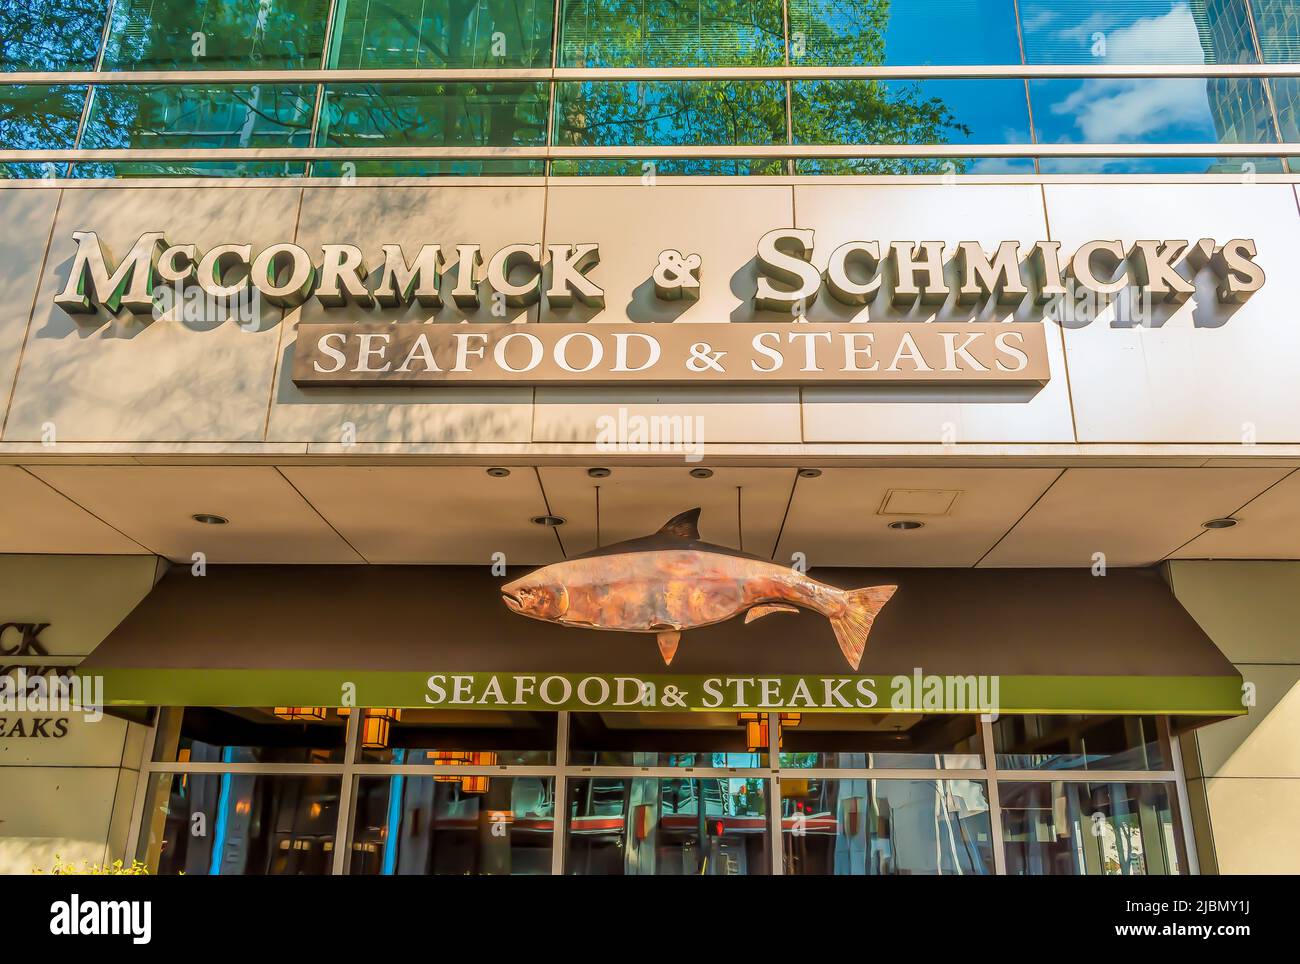 McCormick and Schmicks exterior facade brand and logo signage in light of dusk with hanging fish emblem and reflective glass in uptown Charlotte. Stock Photo